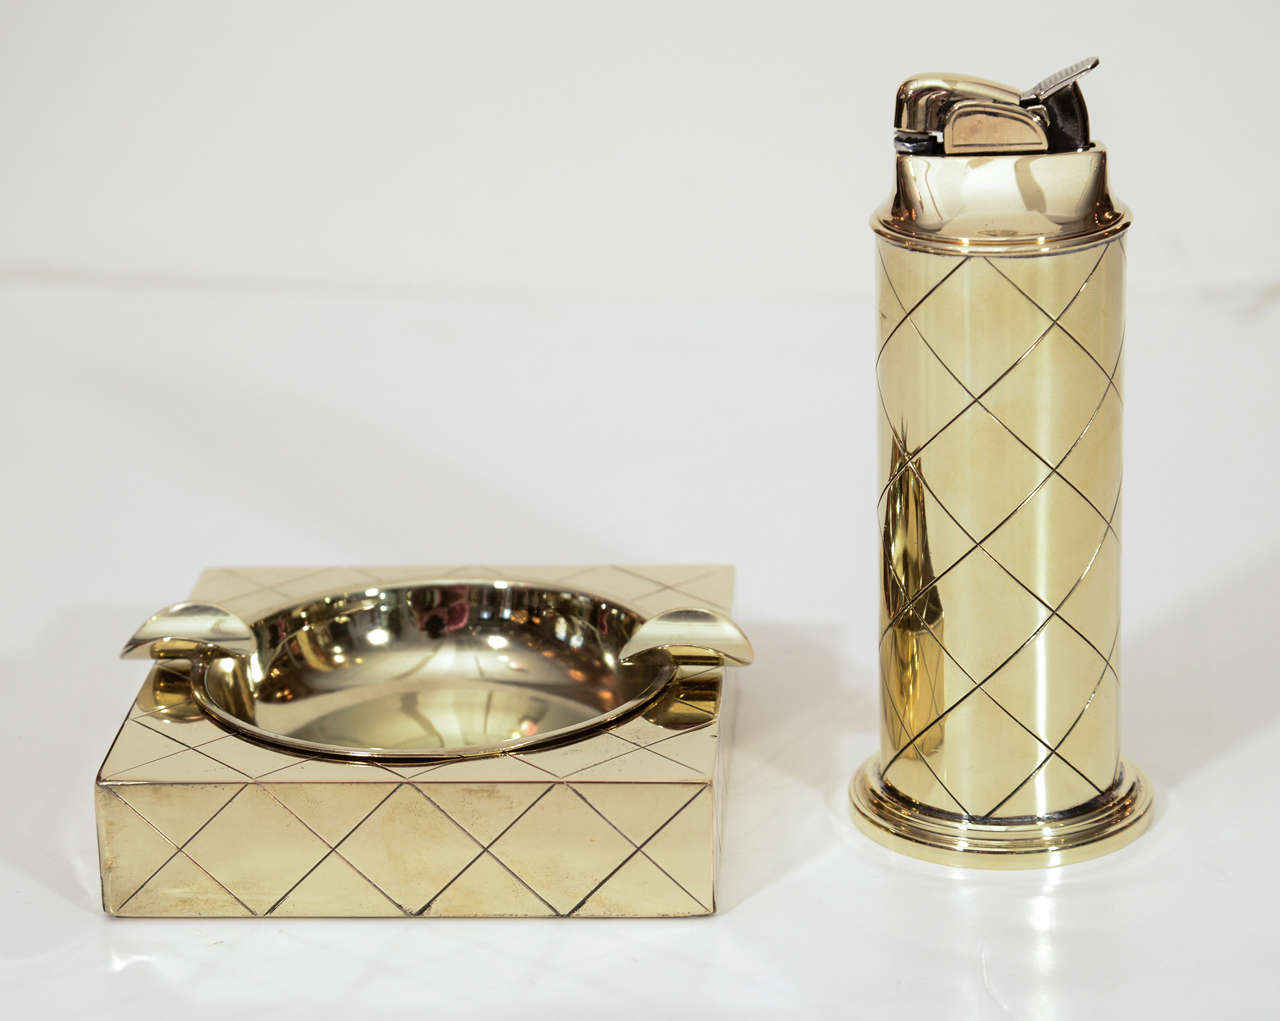 Fantastic rare brass smoking set composed of a lighter and ashtray featuring the iconic diamond pattern by Tommi Parzinger.